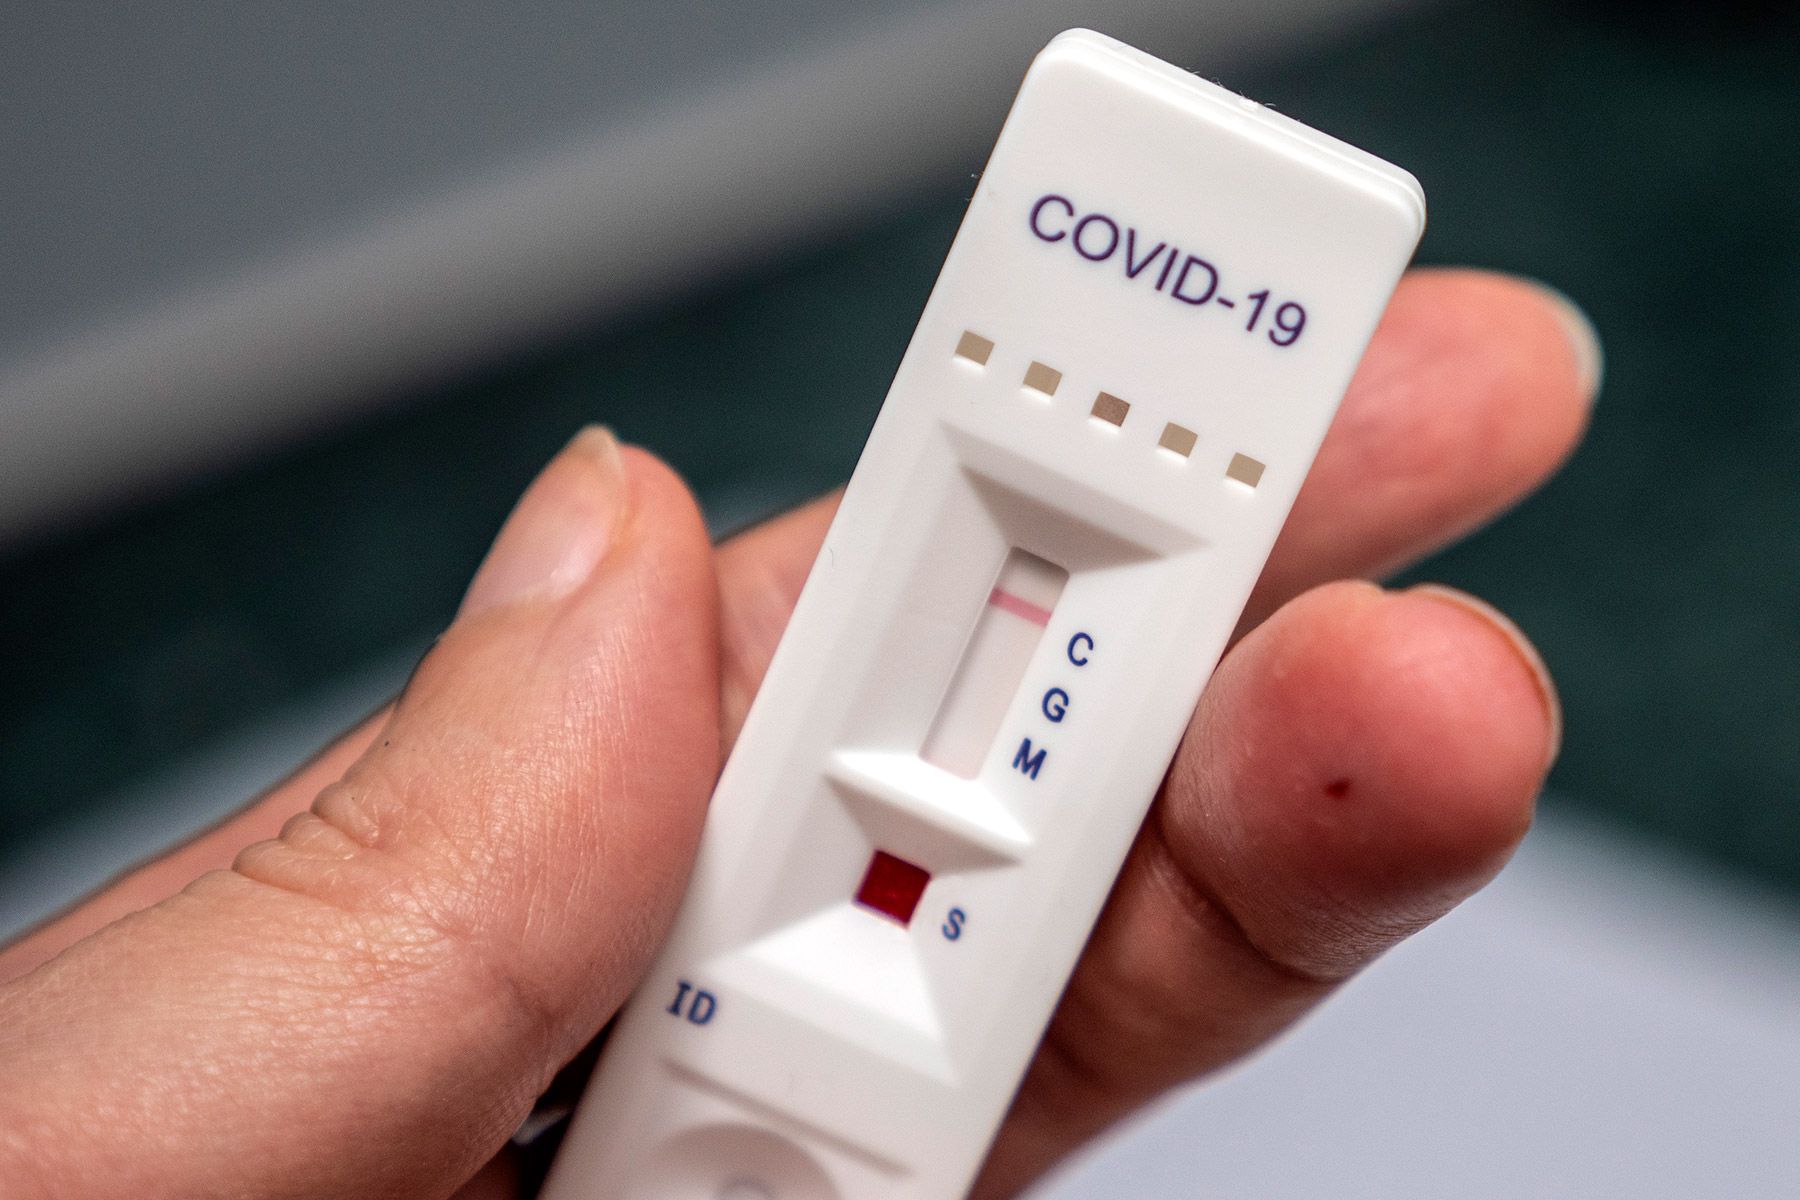 The Feds’ website for free COVID testing at home launches early in the day